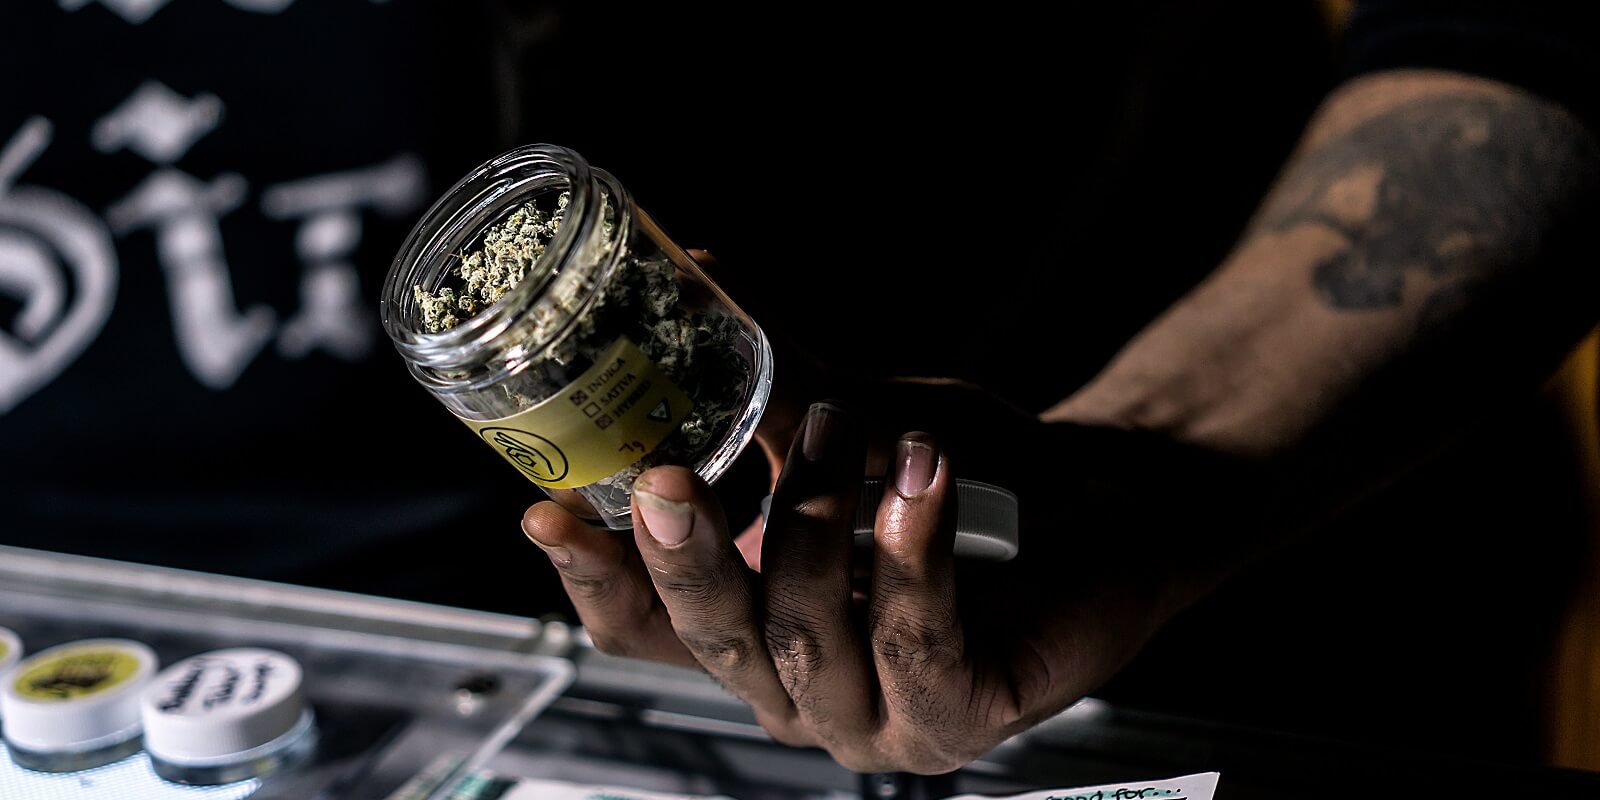 a vendor showing off a jar of cannabis flowers